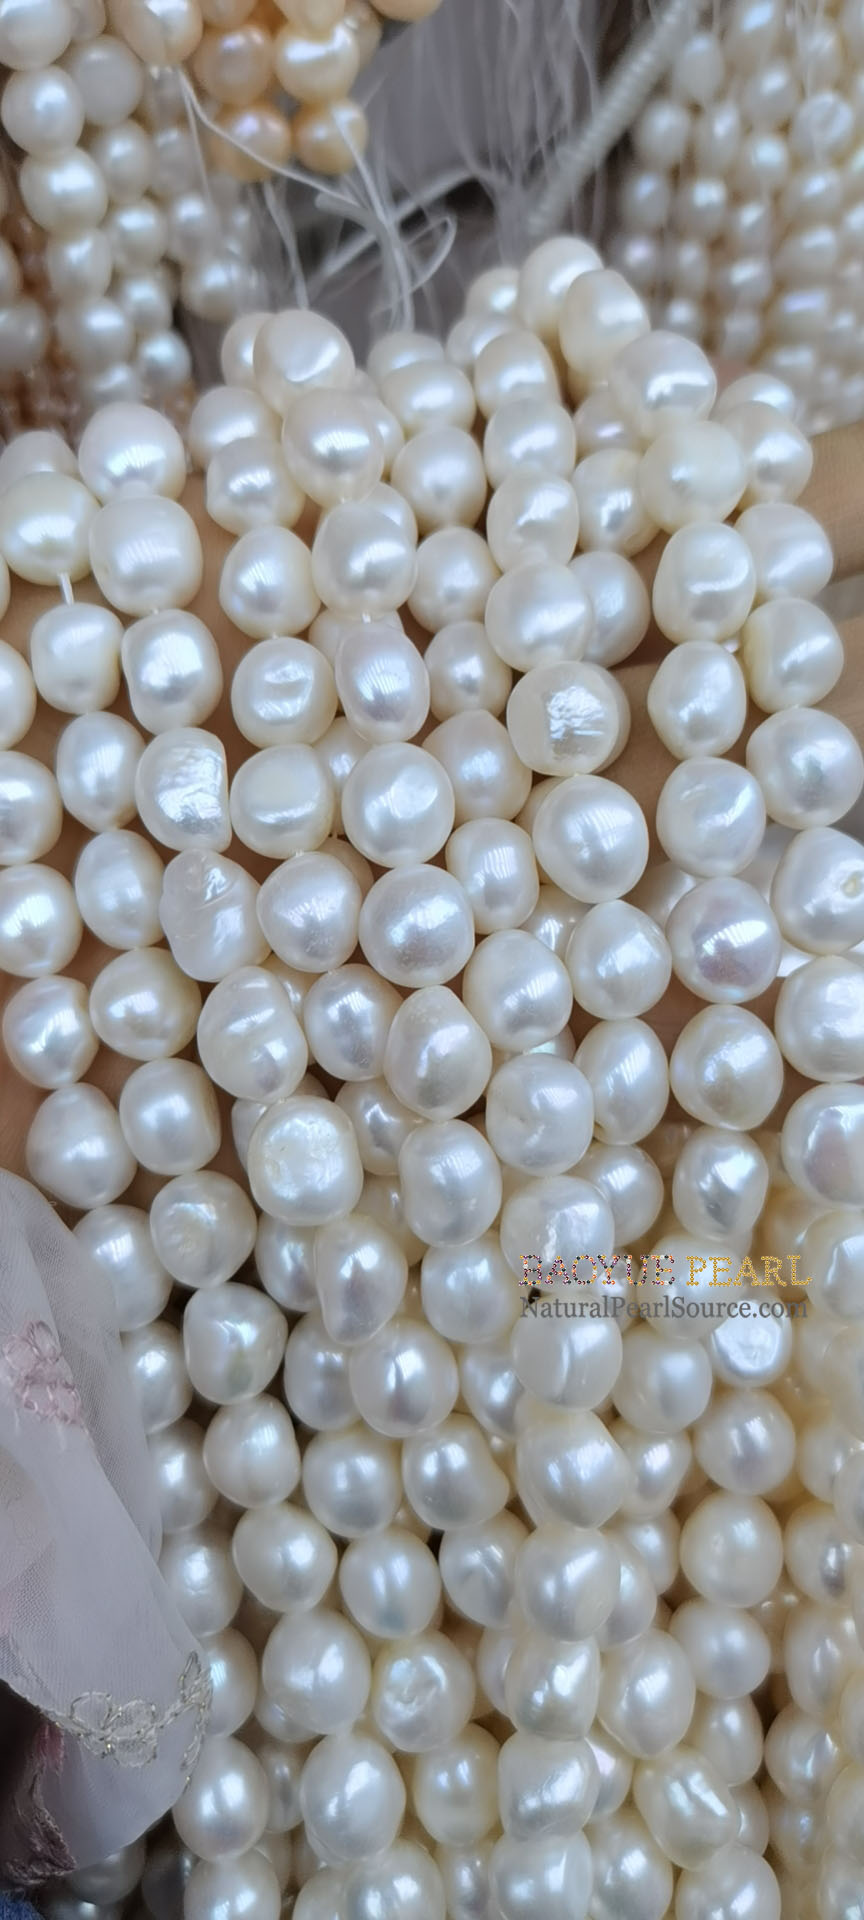 11.5-12.5 mm big baroque loose nature freshwater pearl wholesale in strand, AA quality without nuclear